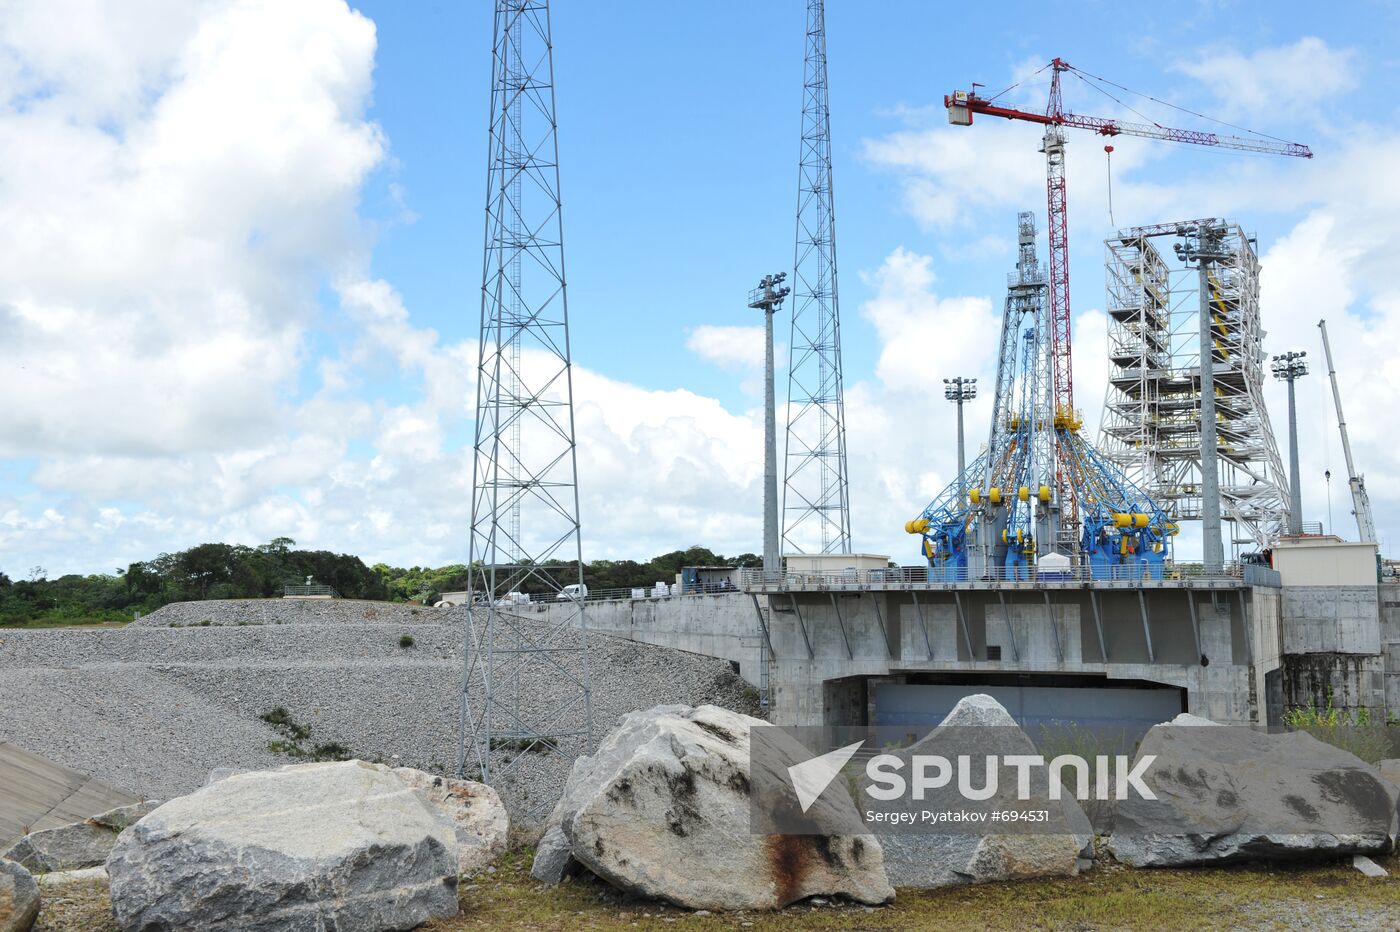 Construction of space station Soyuz launch site